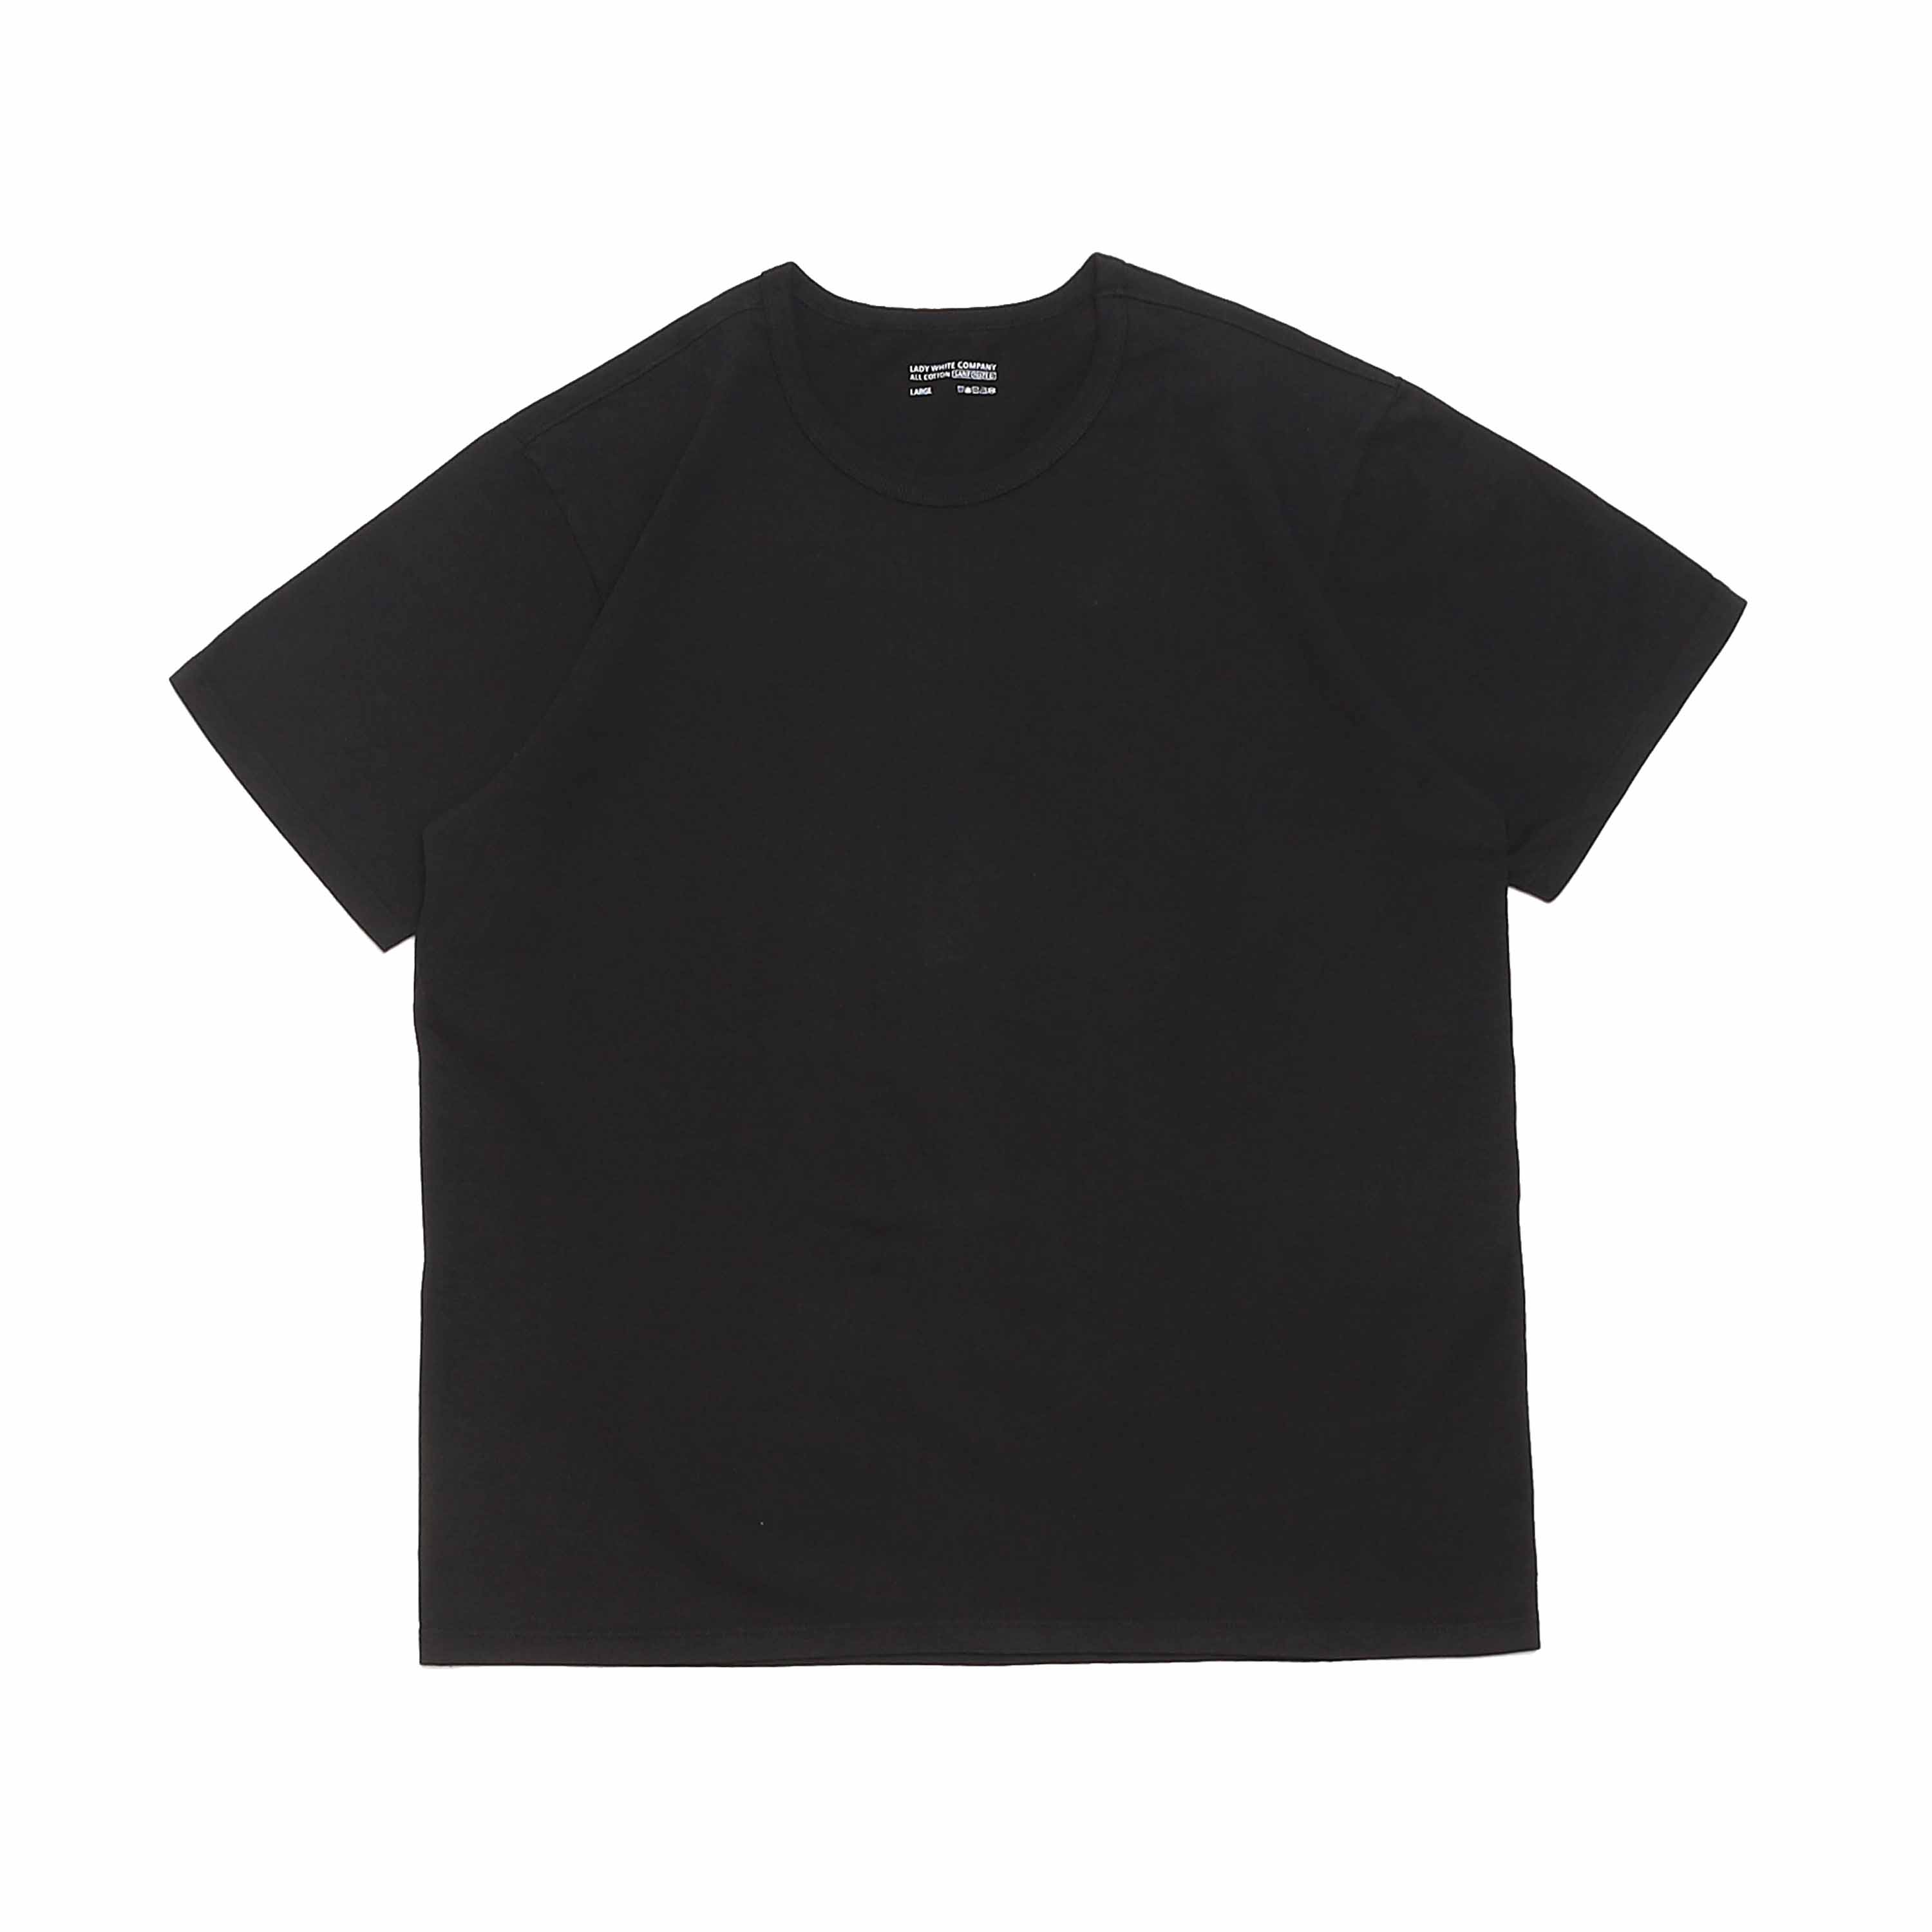 OUR T-SHIRTS - BLACK